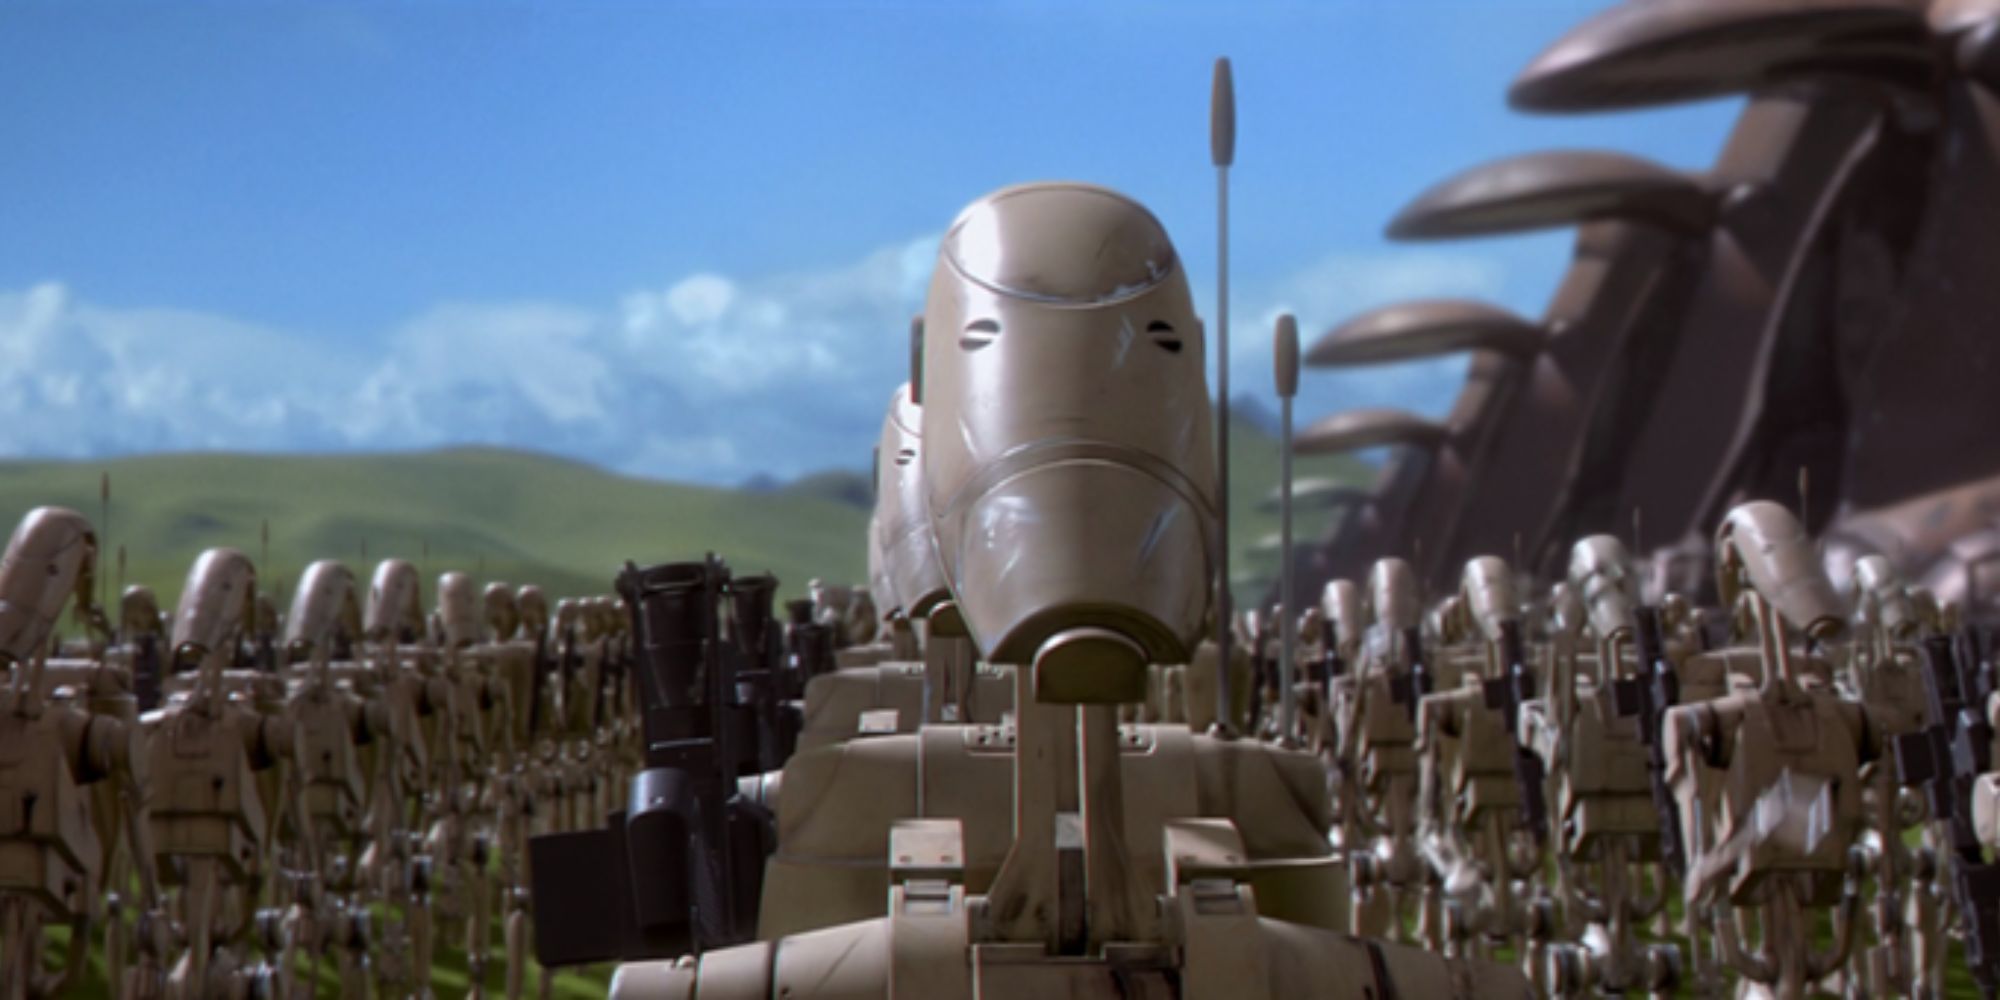 Legions of Battle Droids are deployed